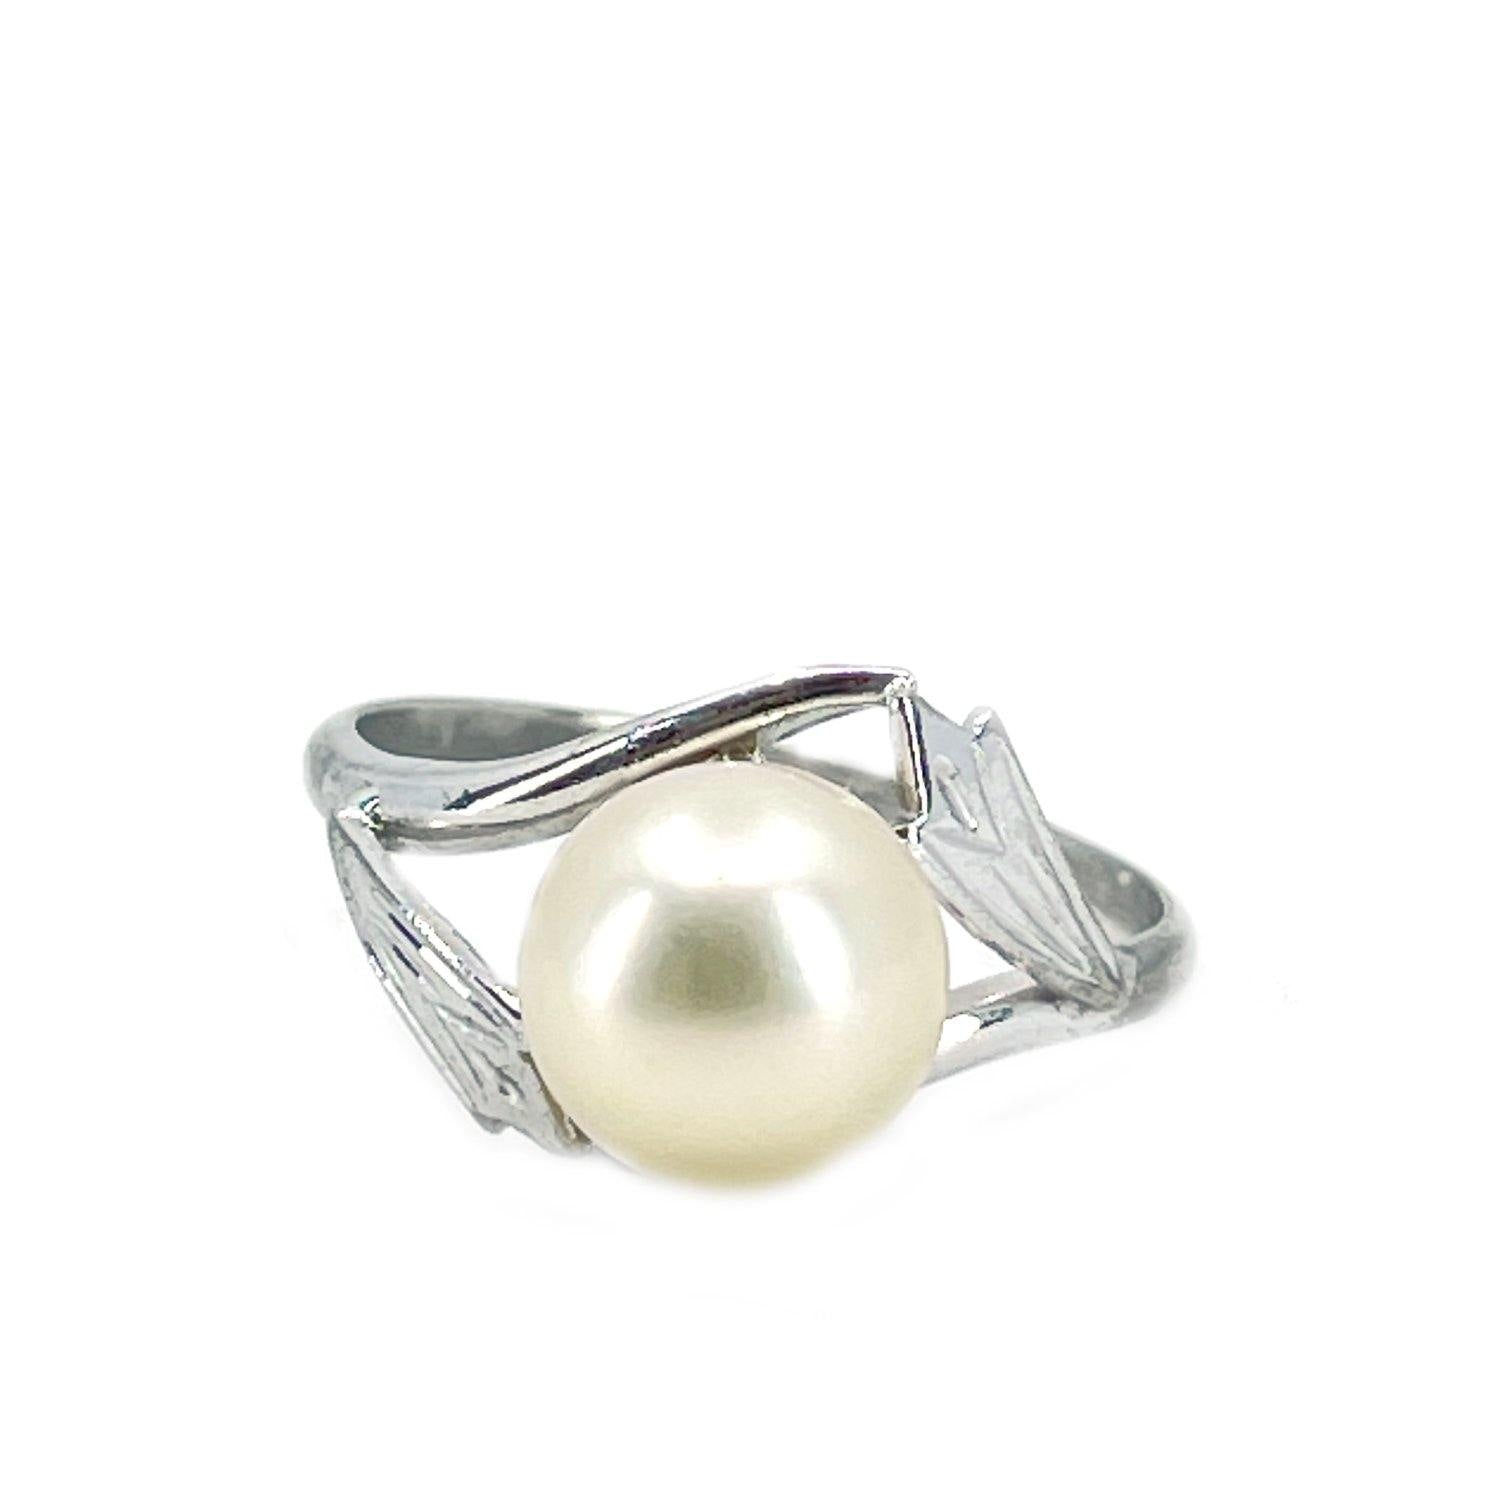 Botanical Double Leaf Japanese Saltwater Blue Akoya Cultured Pearl Ring- Sterling Silver Sz 6